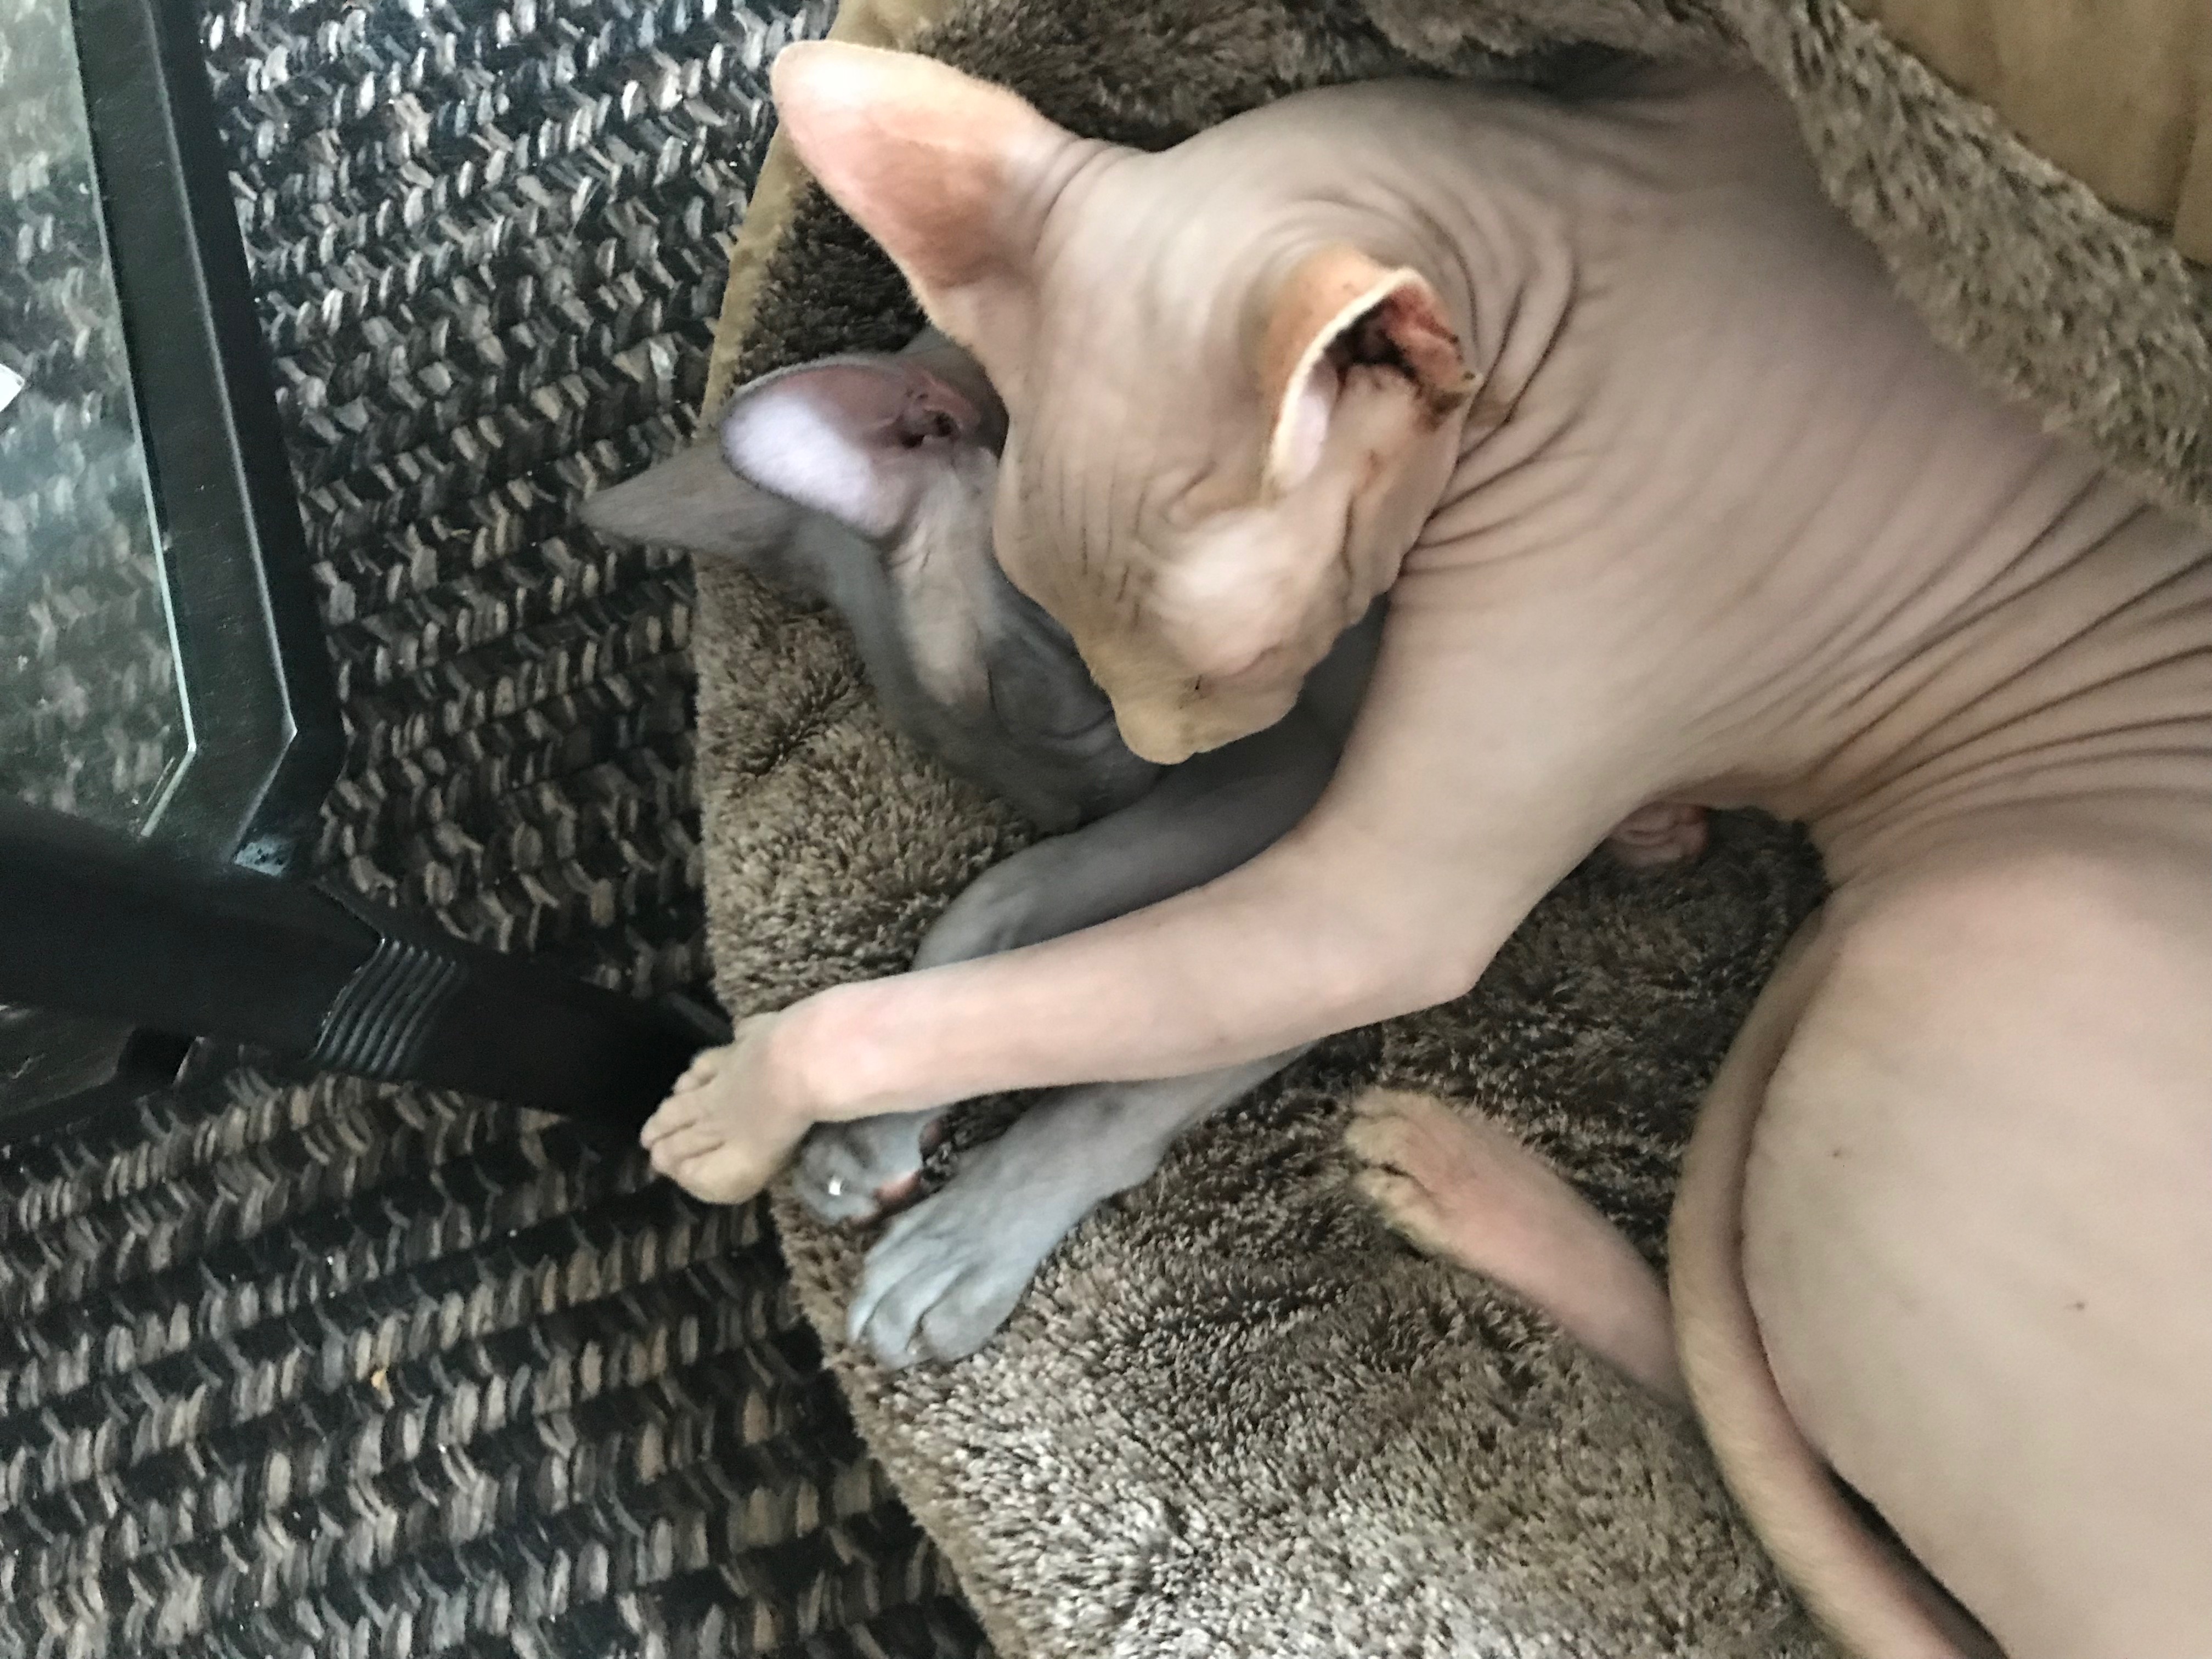 two hairless cats cuddling in bed